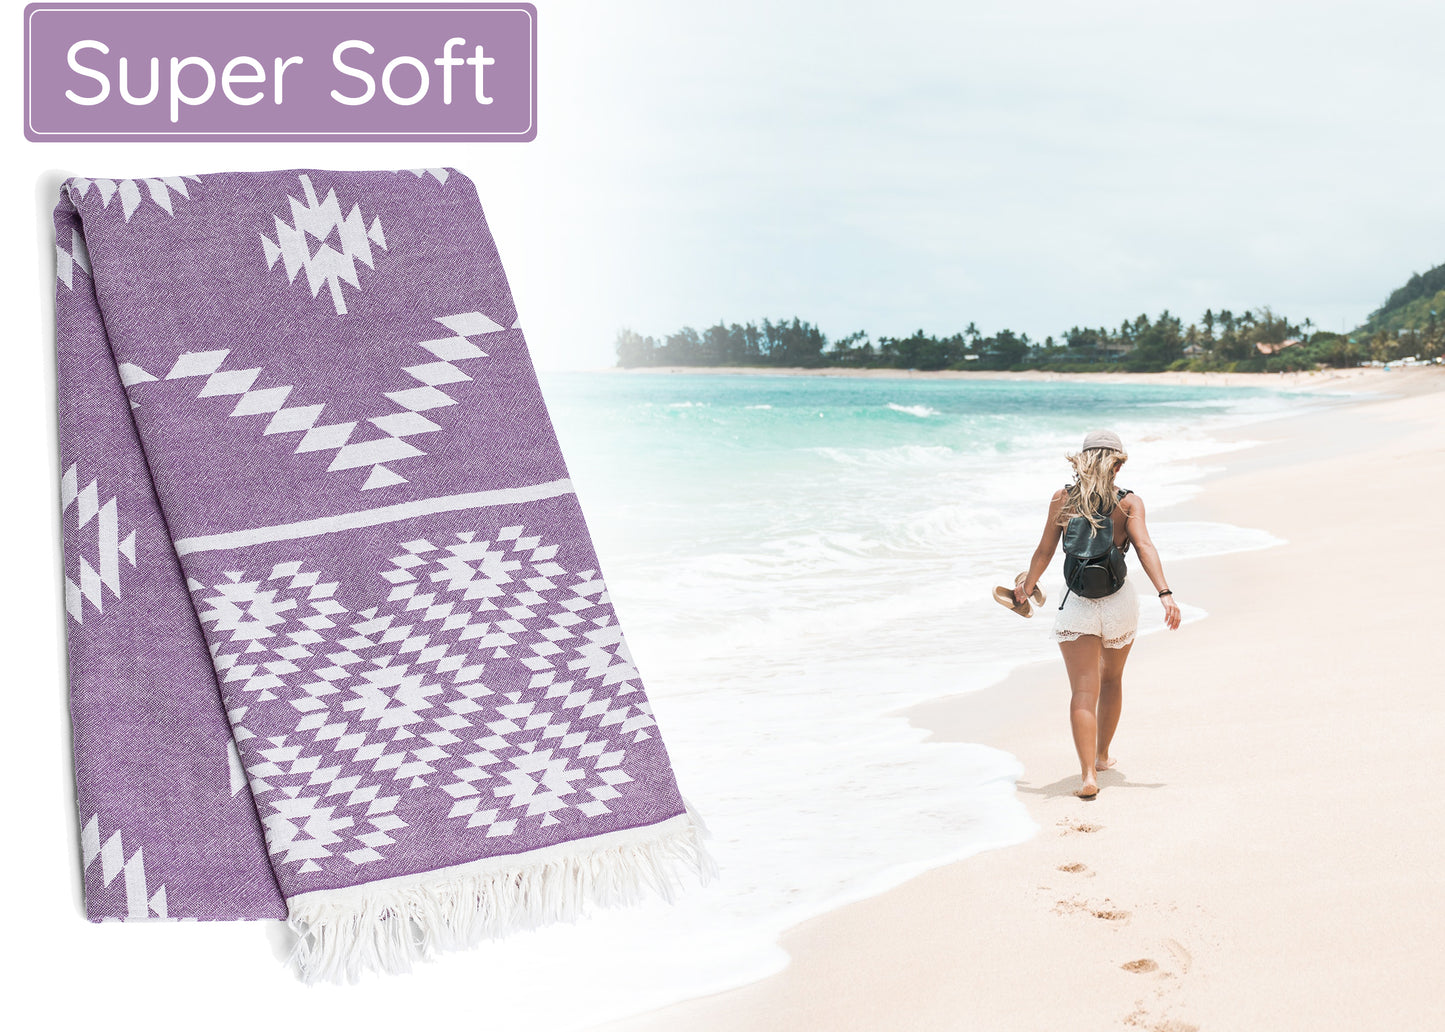 Purple Turkish Beach Towel (35”x67”)  Lightweight, Quick drying and Sand Free Can be Used as Beach Blanket 100% Cotton Vintage Design